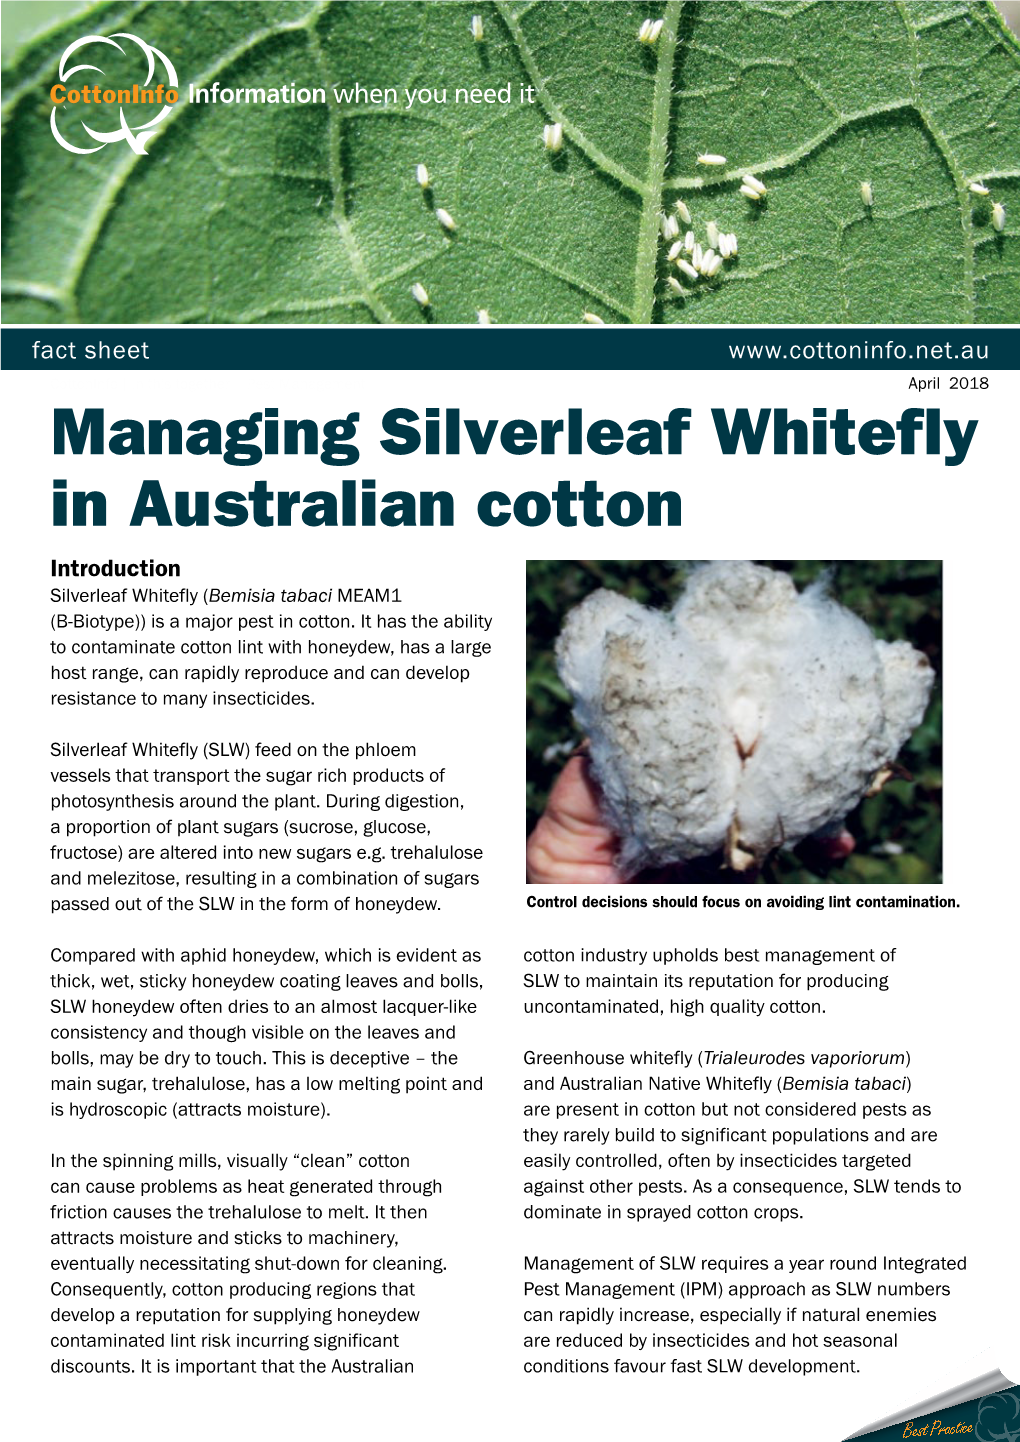 Managing Silverleaf Whitefly in Australian Cotton Introduction Silverleaf Whitefly (Bemisia Tabaci MEAM1 (B-Biotype)) Is a Major Pest in Cotton